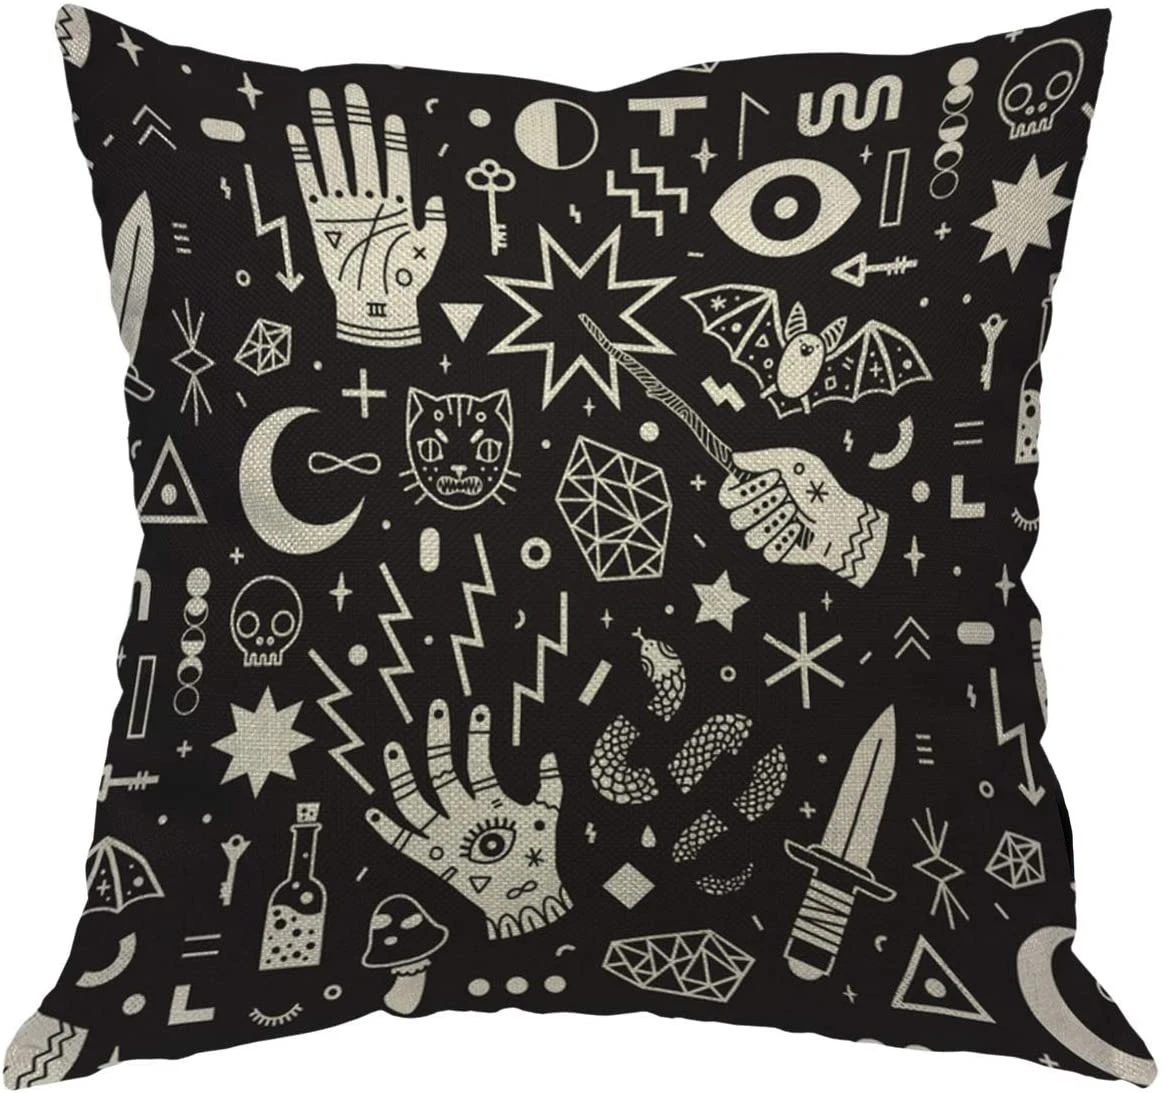 

Throw Pillow Cover Witchcraft 18x18 Inch Magical Style Hand Eyes Moon Skull Cat Bat Snake Key Square Pillow Case Cushion Cover